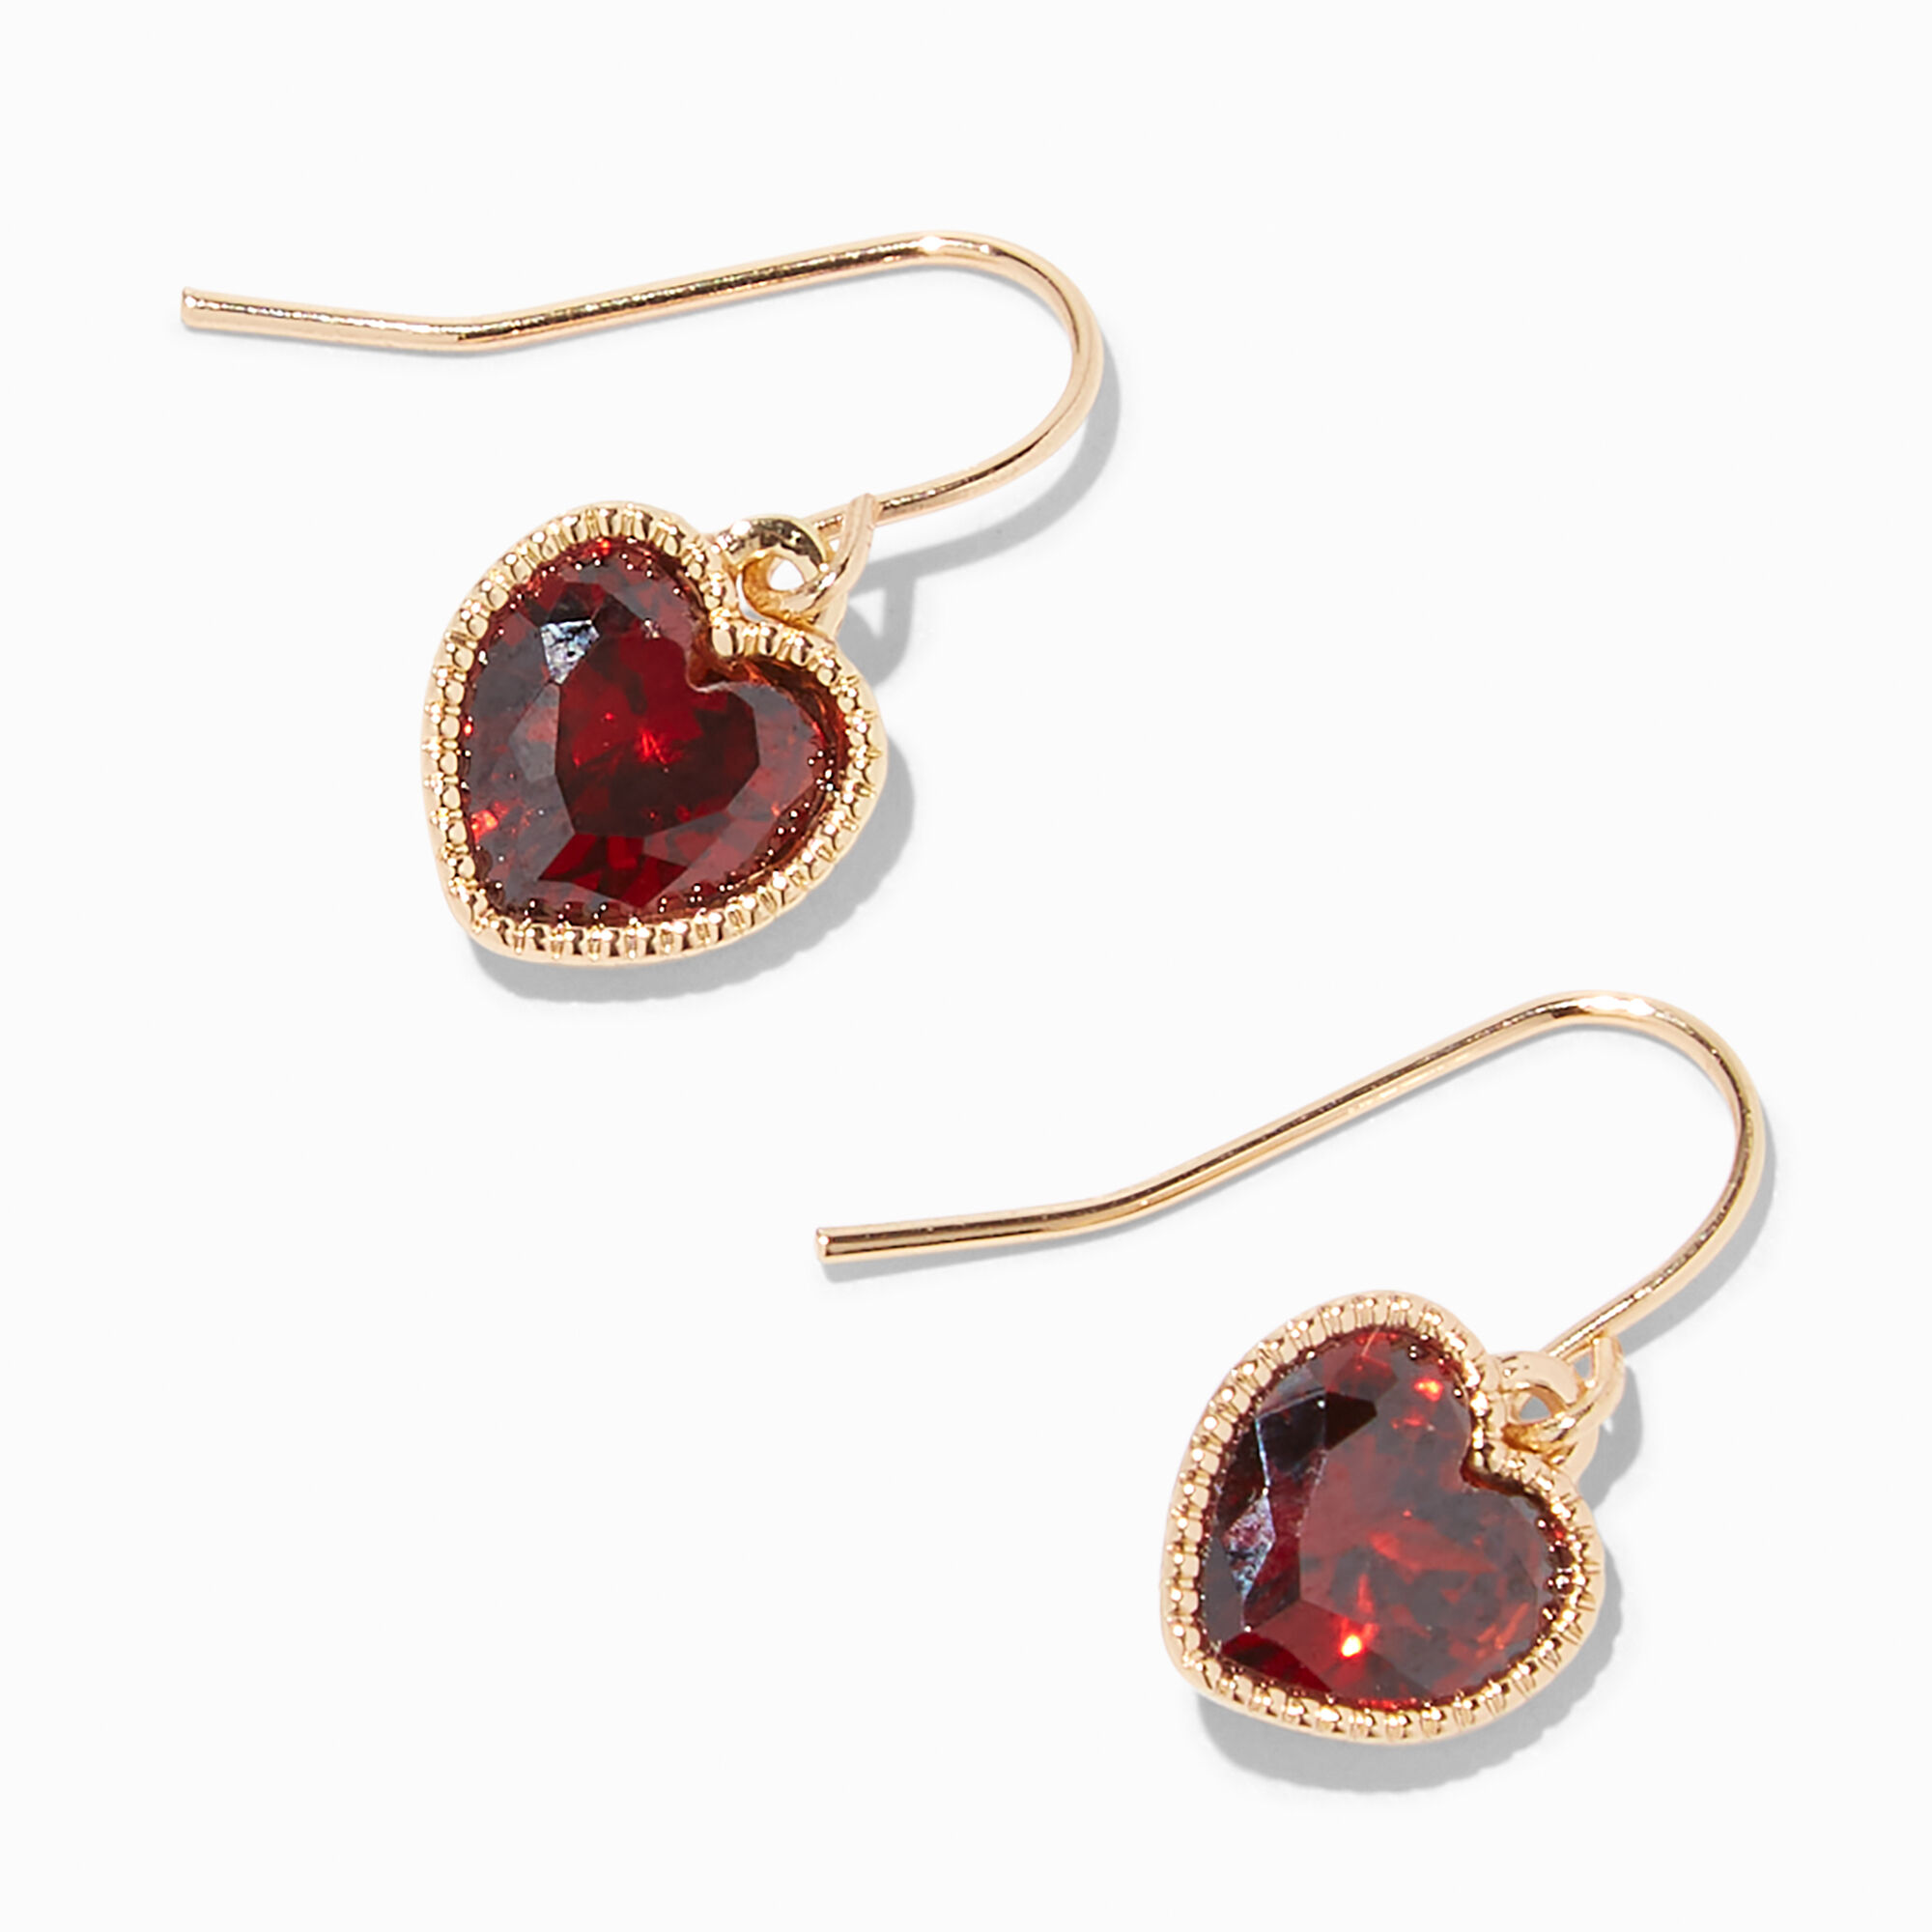 Flipkartcom  Buy GIVA Sterling Silver Ruby Red Heart Earrings for women   girls with 925 stamped Silver Hoop Earring Online at Best Prices in India